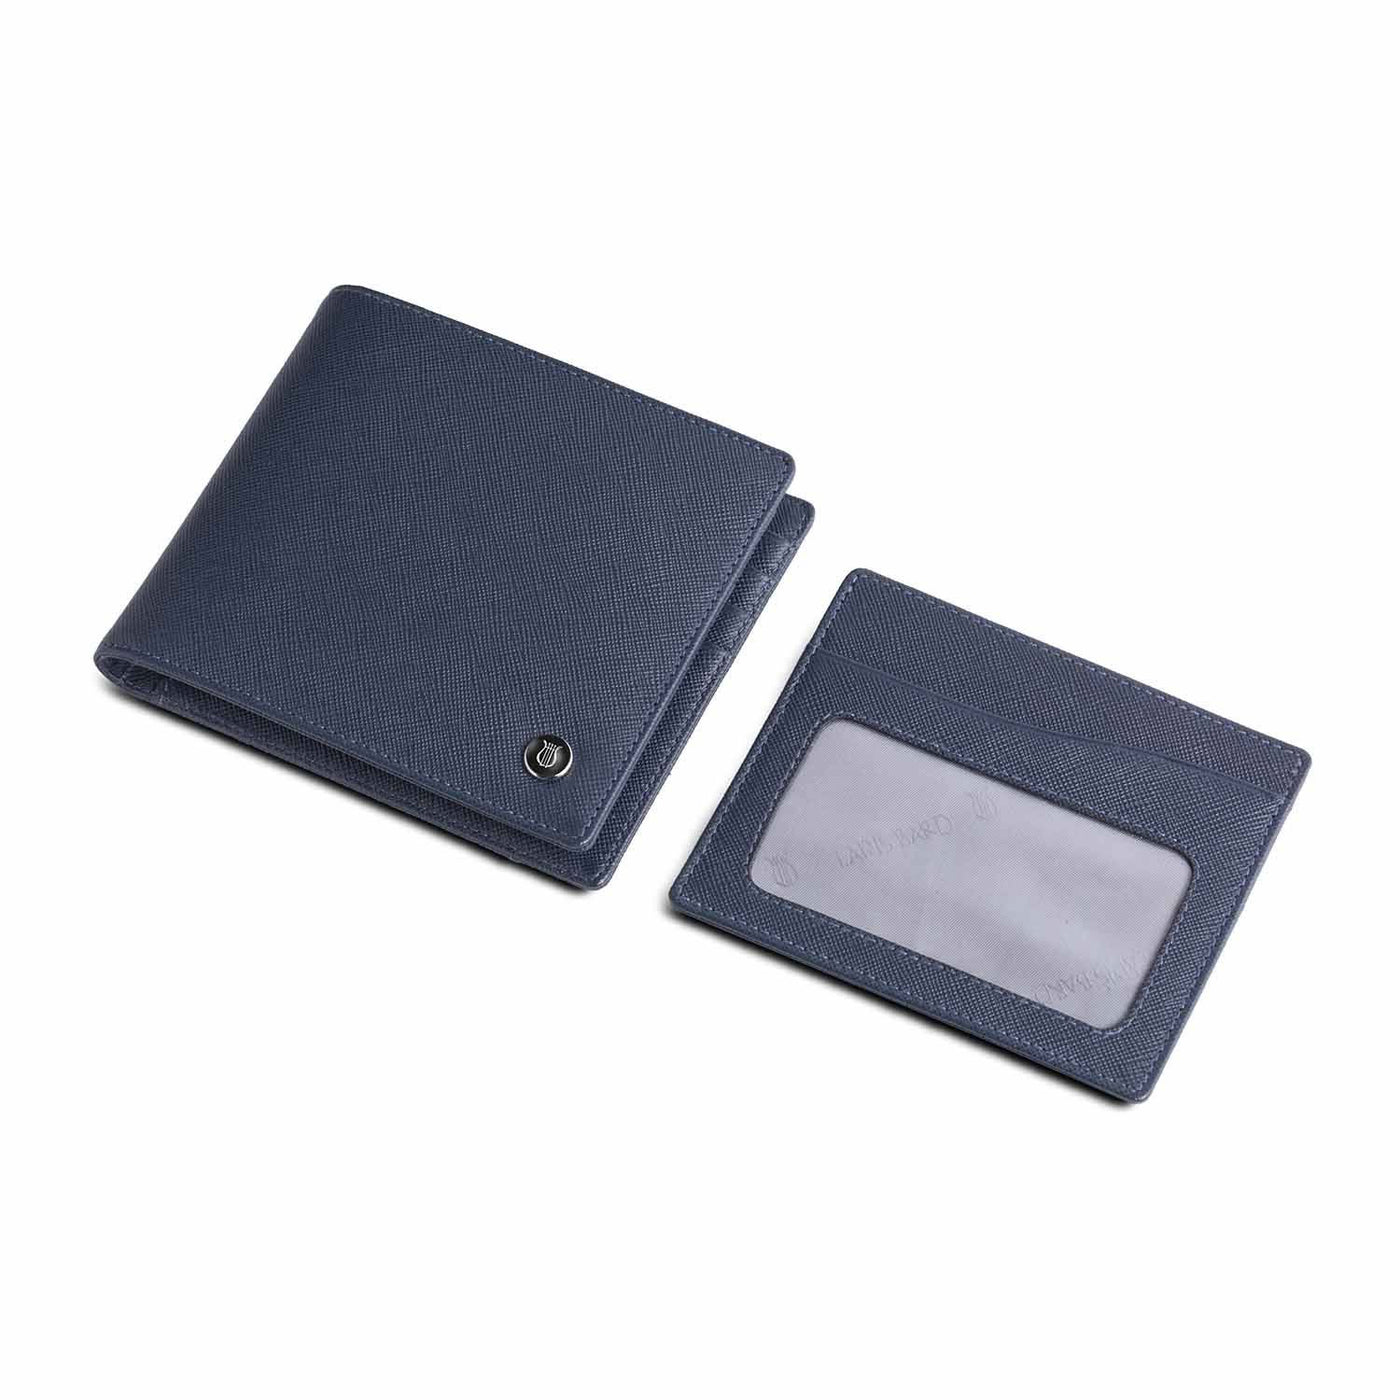 Lapis Bard Stanford Wallet With Money Clip, Blue